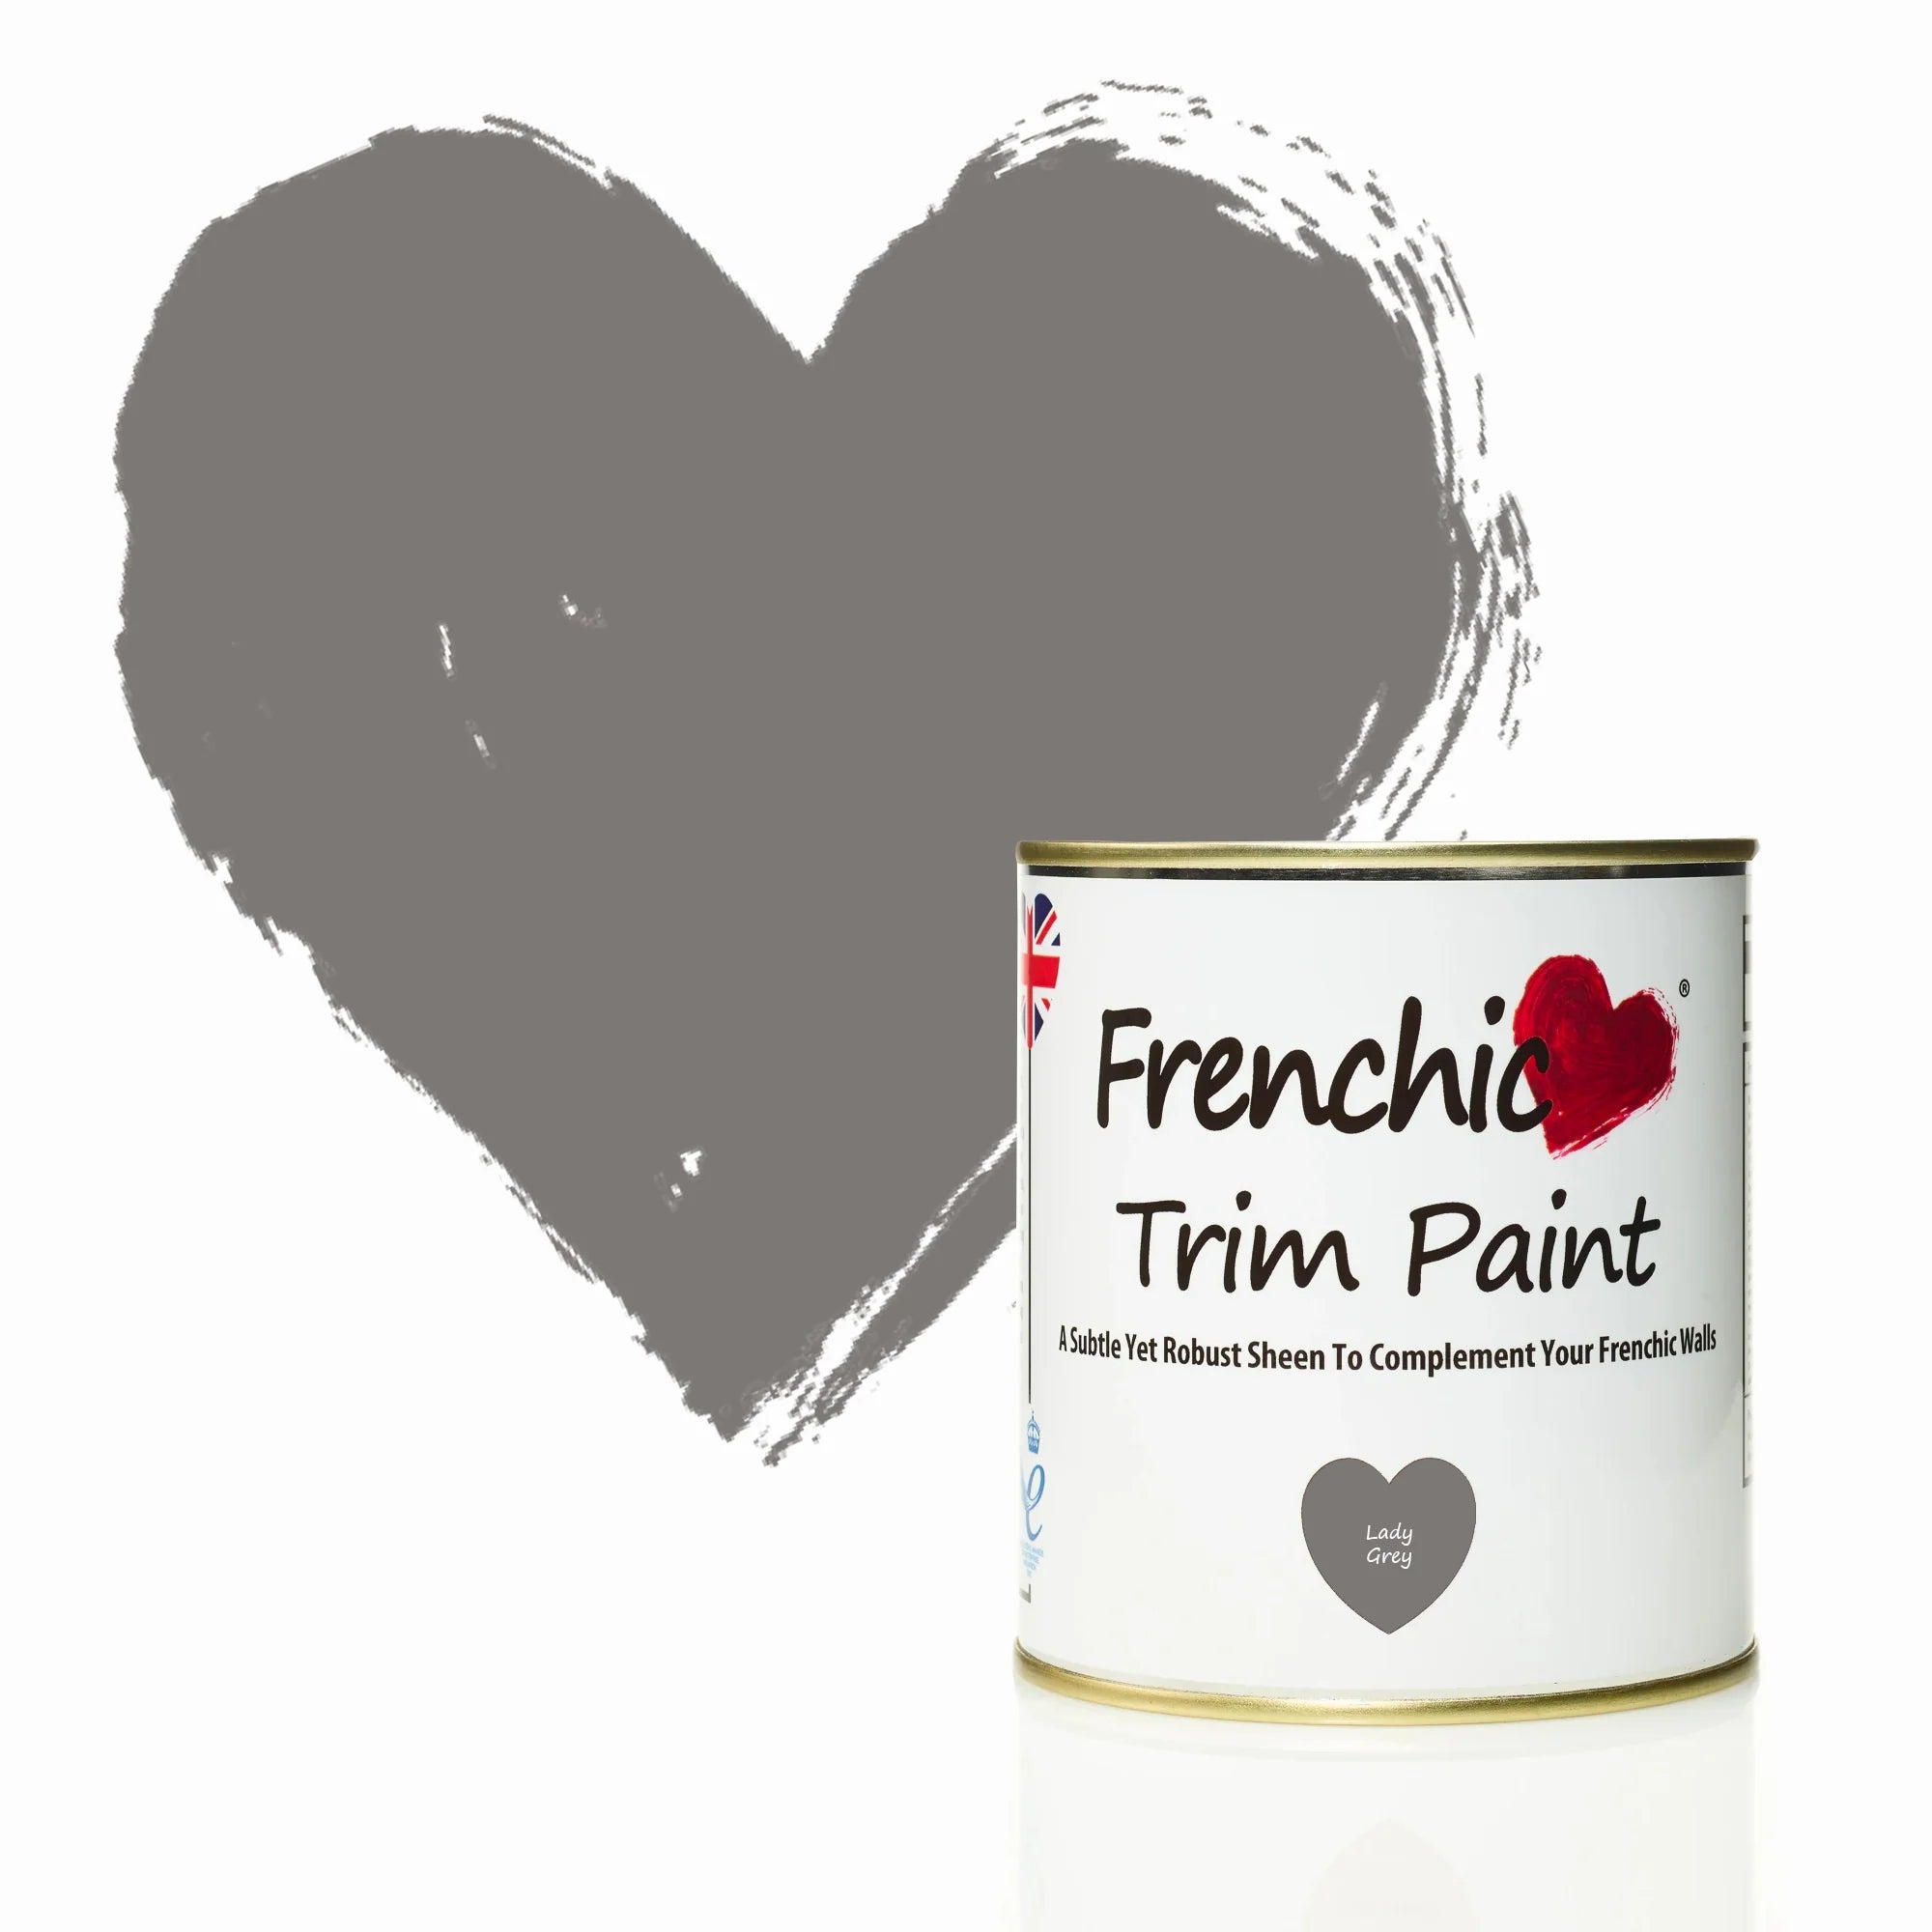 Frenchic Paint Lady Grey Trim Paint Frenchic Paint Trim Paint Range by Weirs of Baggot Street Irelands Largest and most Trusted Stockist of Frenchic Paint. Shop online for Nationwide and Same Day Dublin Delivery